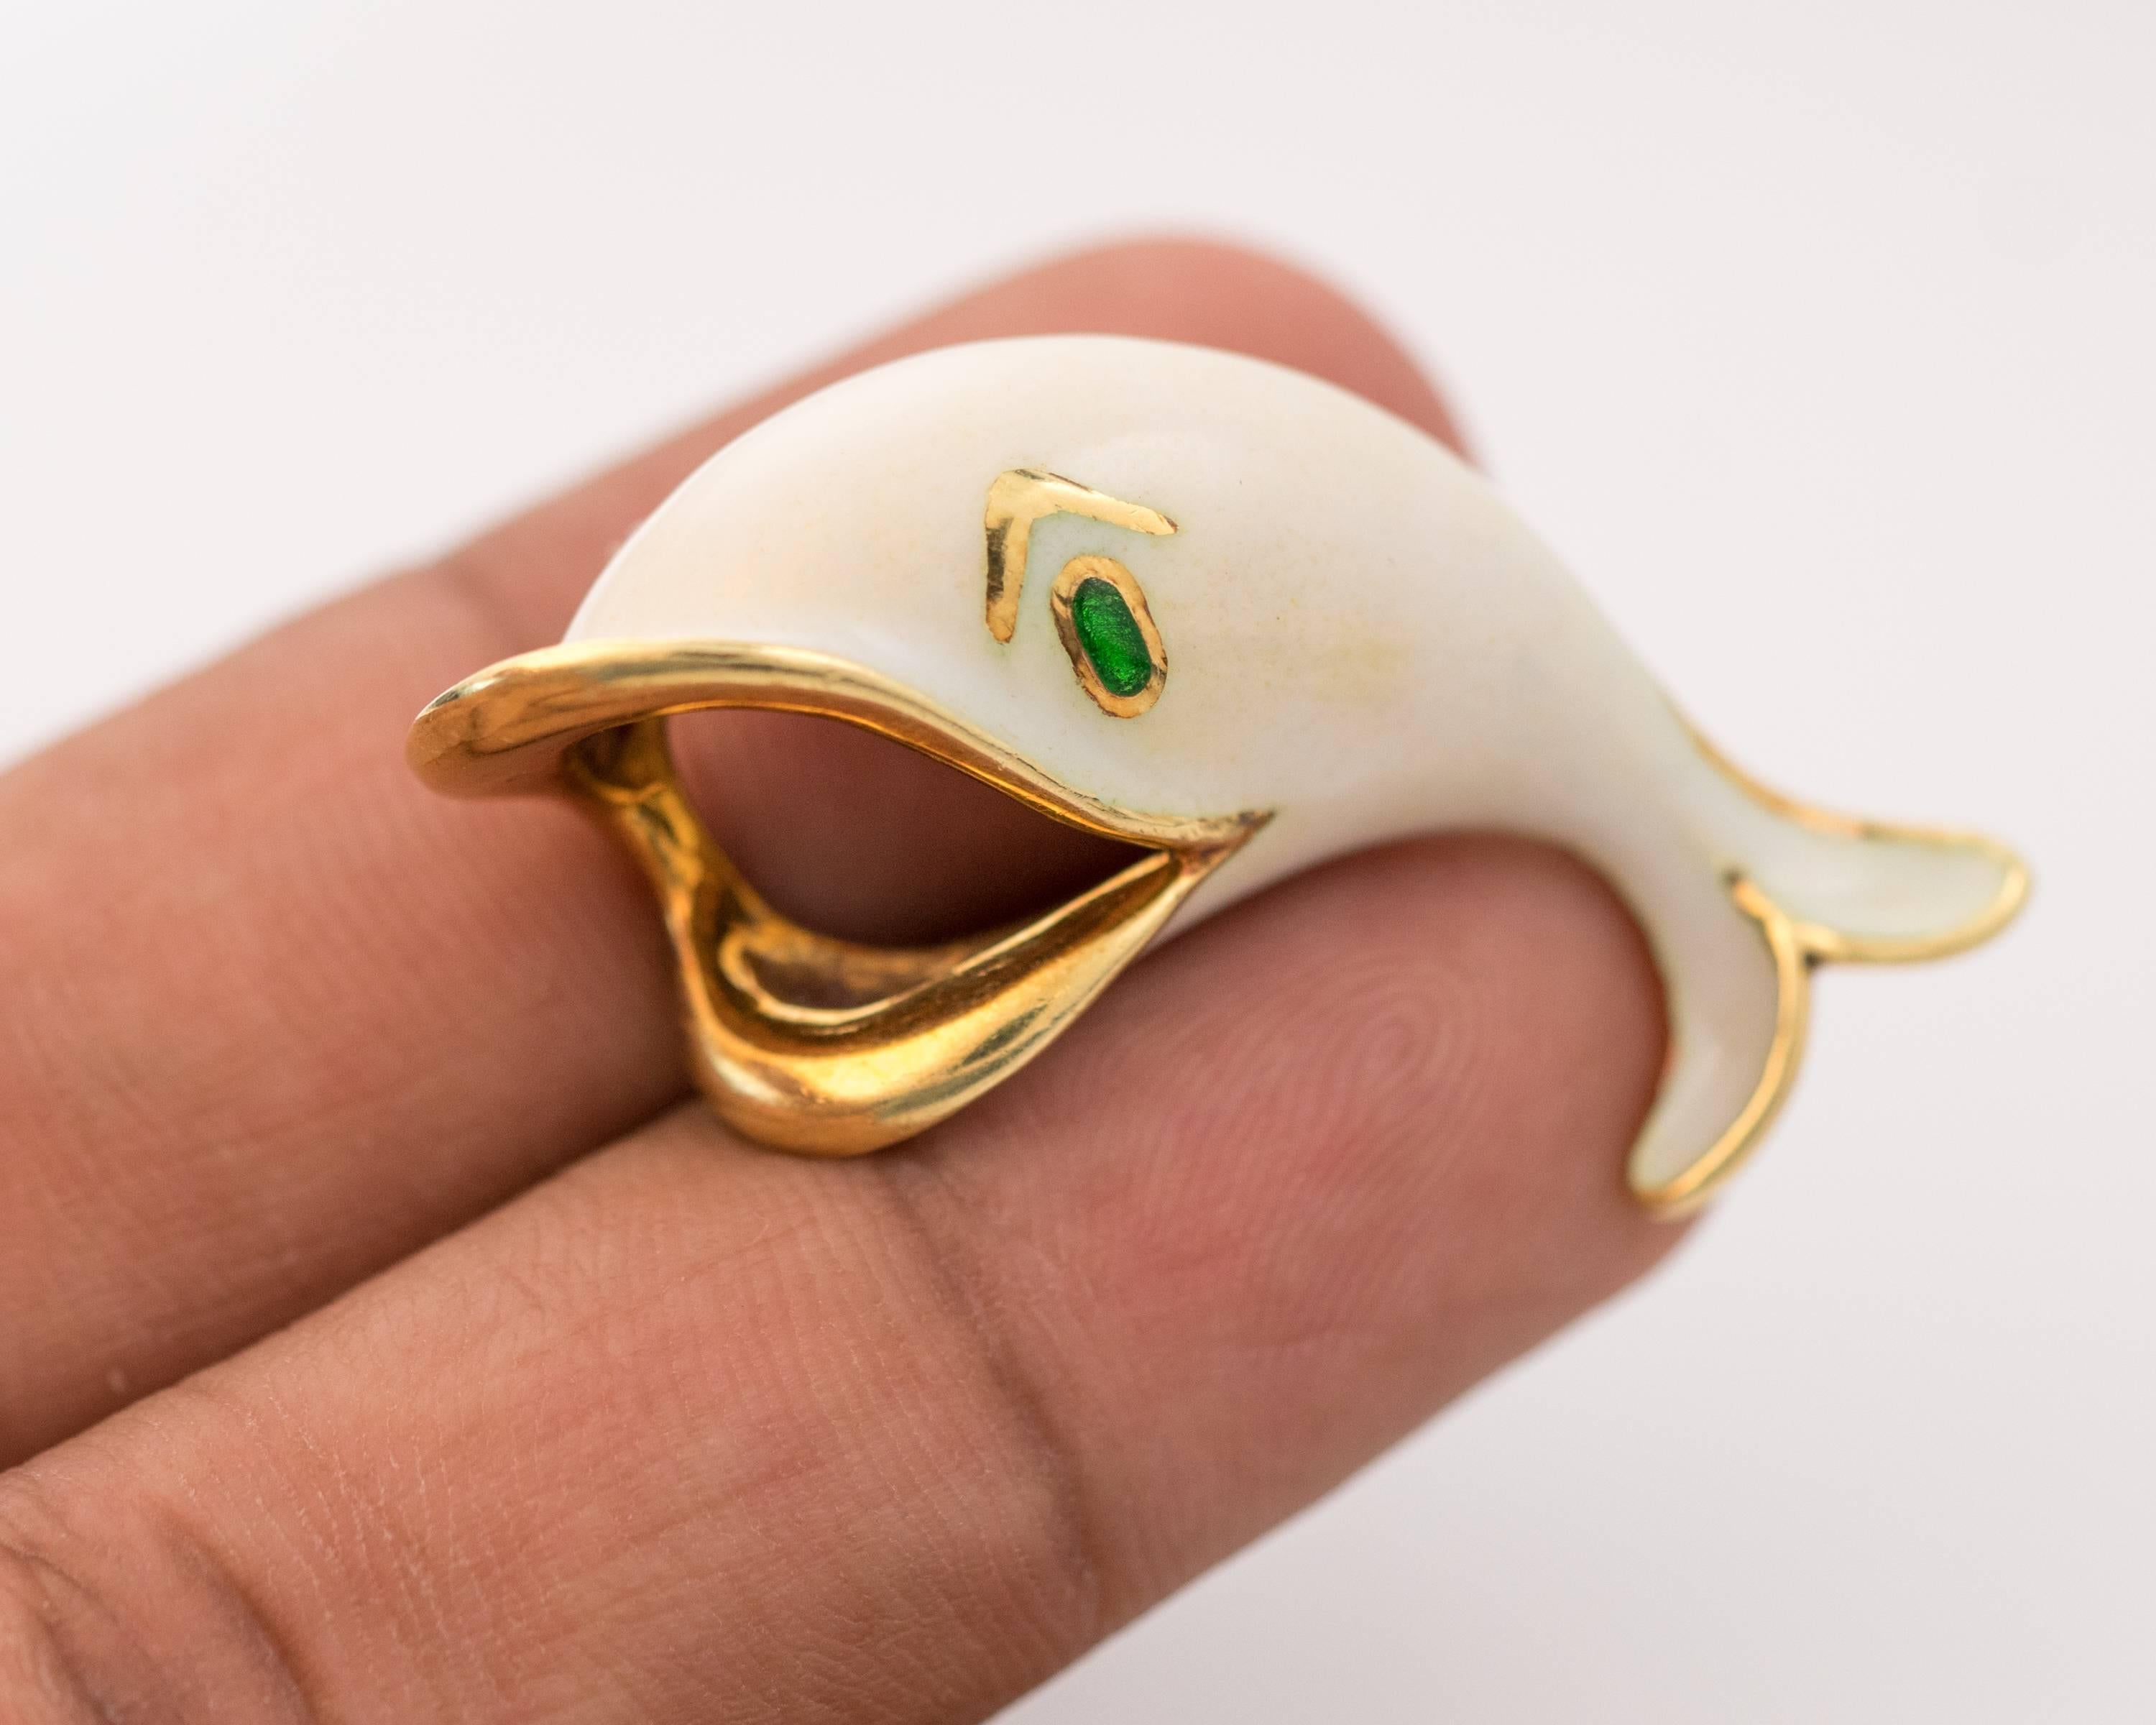 This lovely 1950s Whale Brooch features a white enamel body with a green enamel eye outlined in 18 karat yellow gold. Brooch or Lapel Pin, you choose! This 1950s whimsical 18 karat yellow gold and enamel whale pin makes a perfect accessory for women